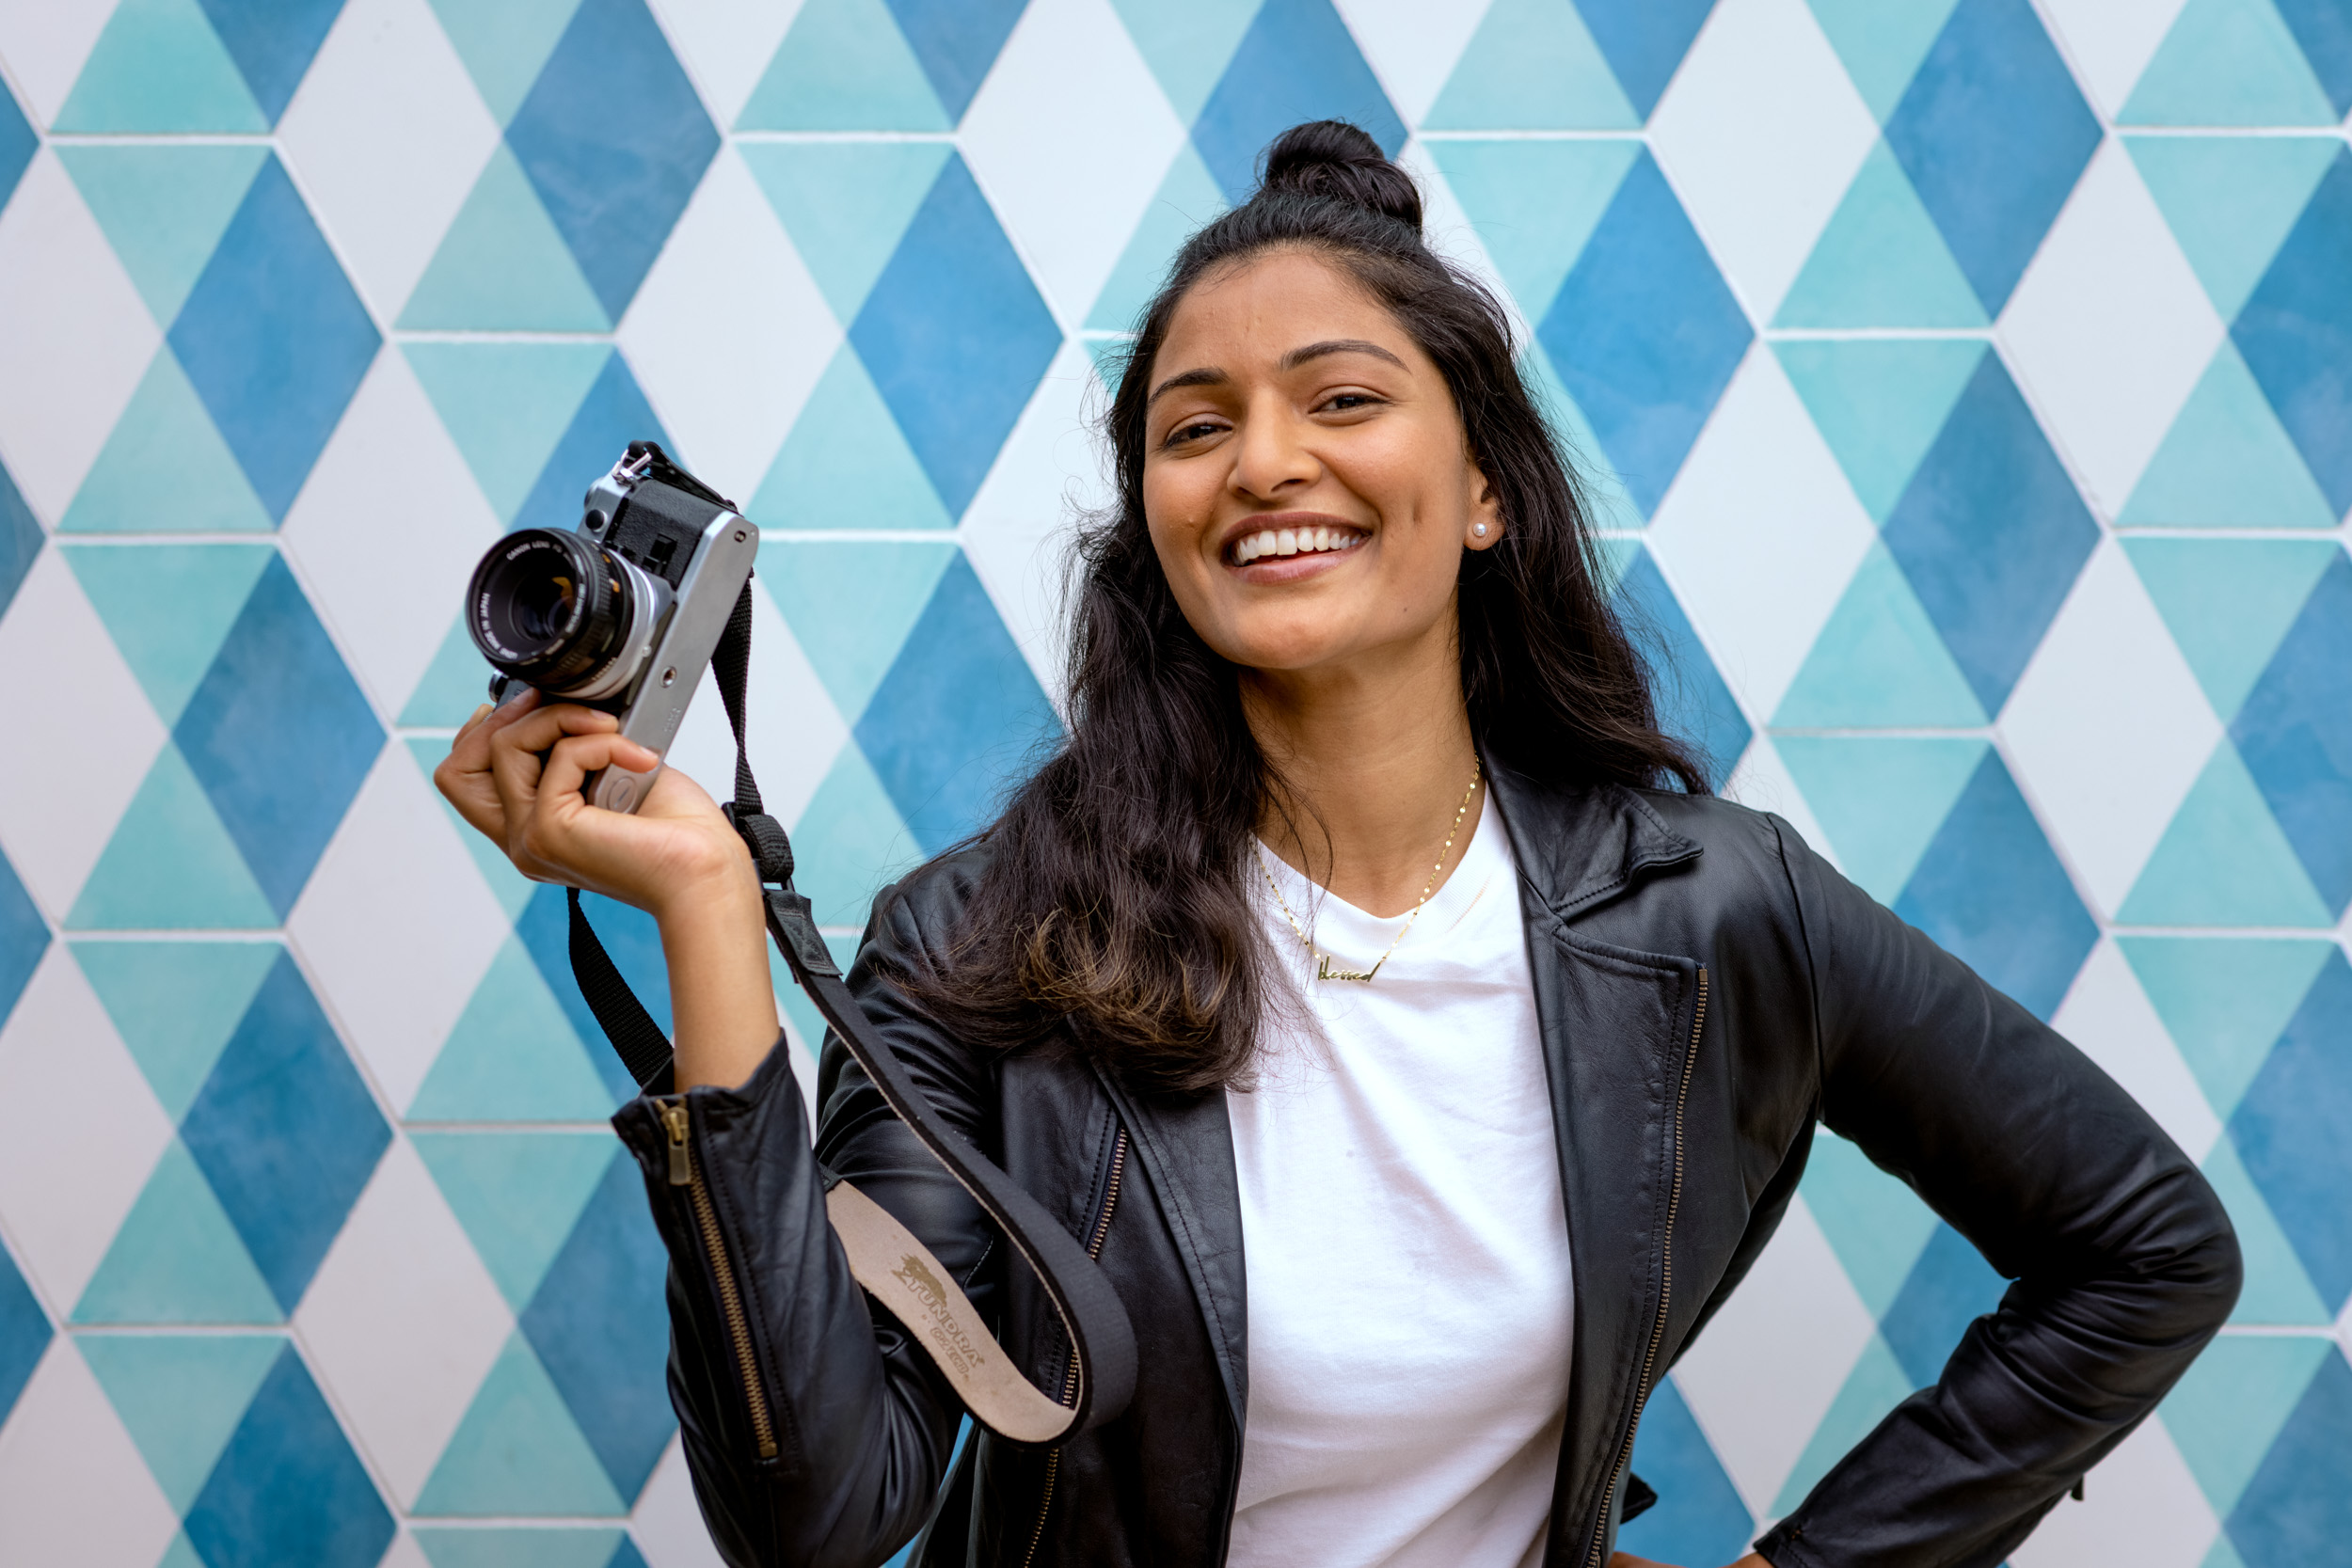 woman smiling and holding film camera in front of checkered pattern wall